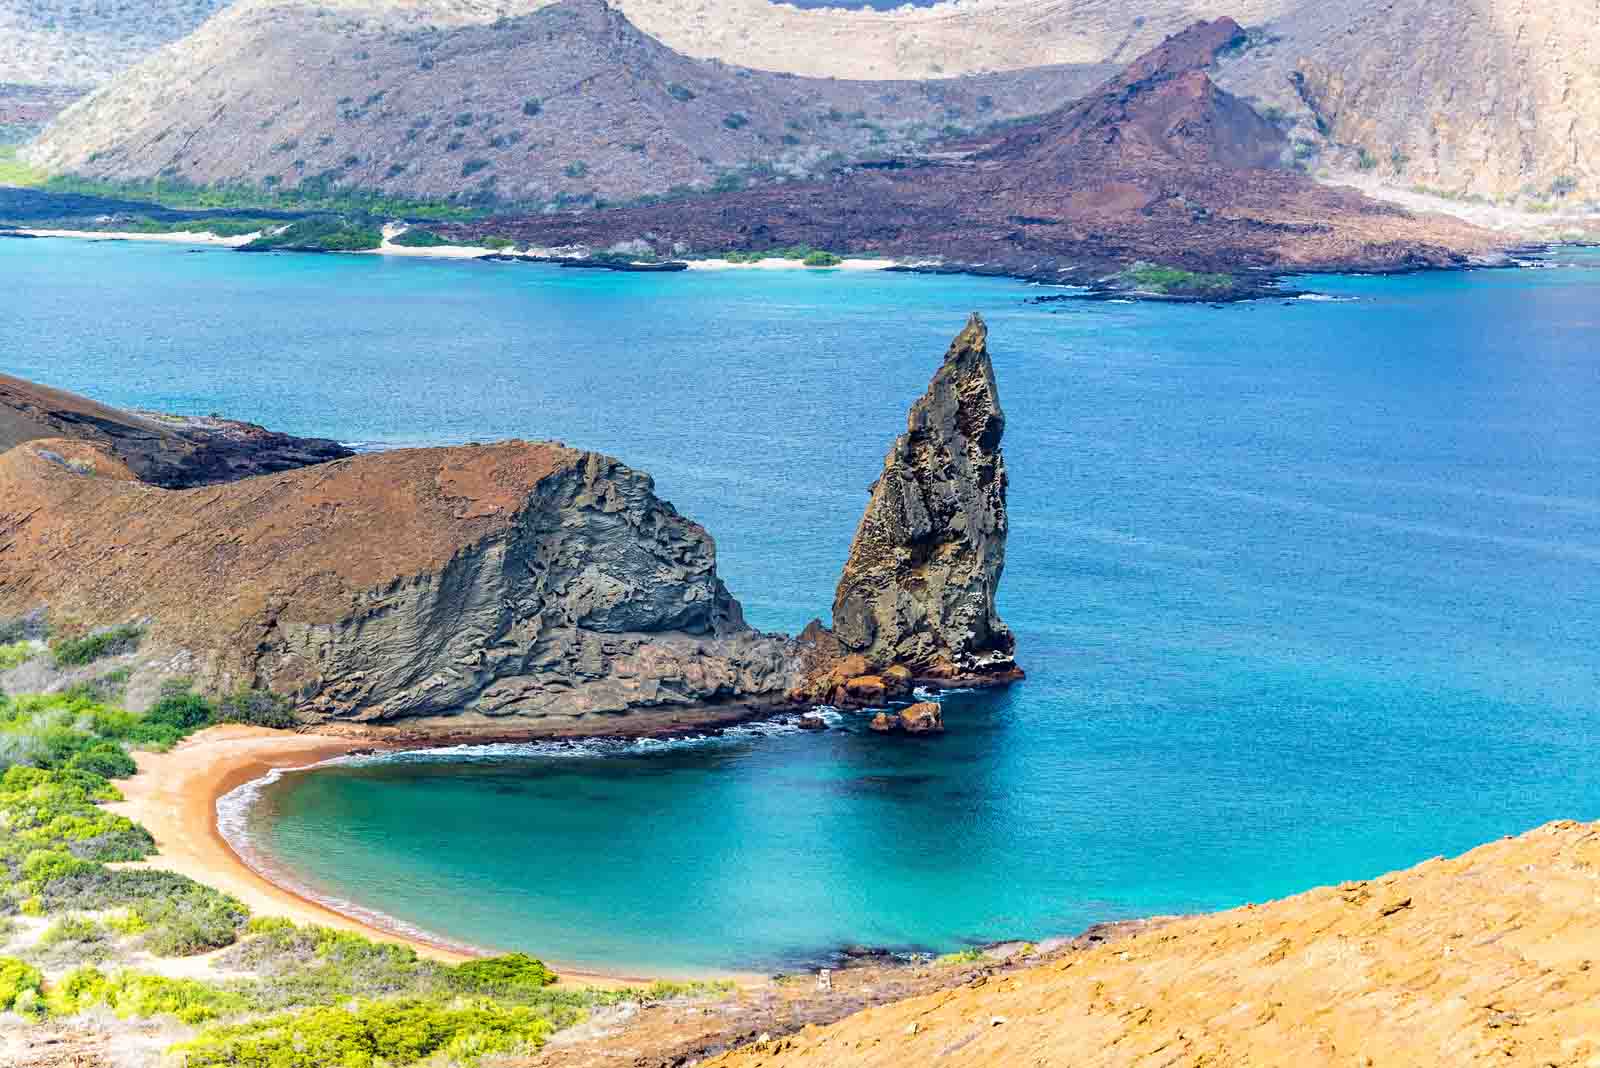 Explore the Galapagos on board the Mary Anne sailboat 